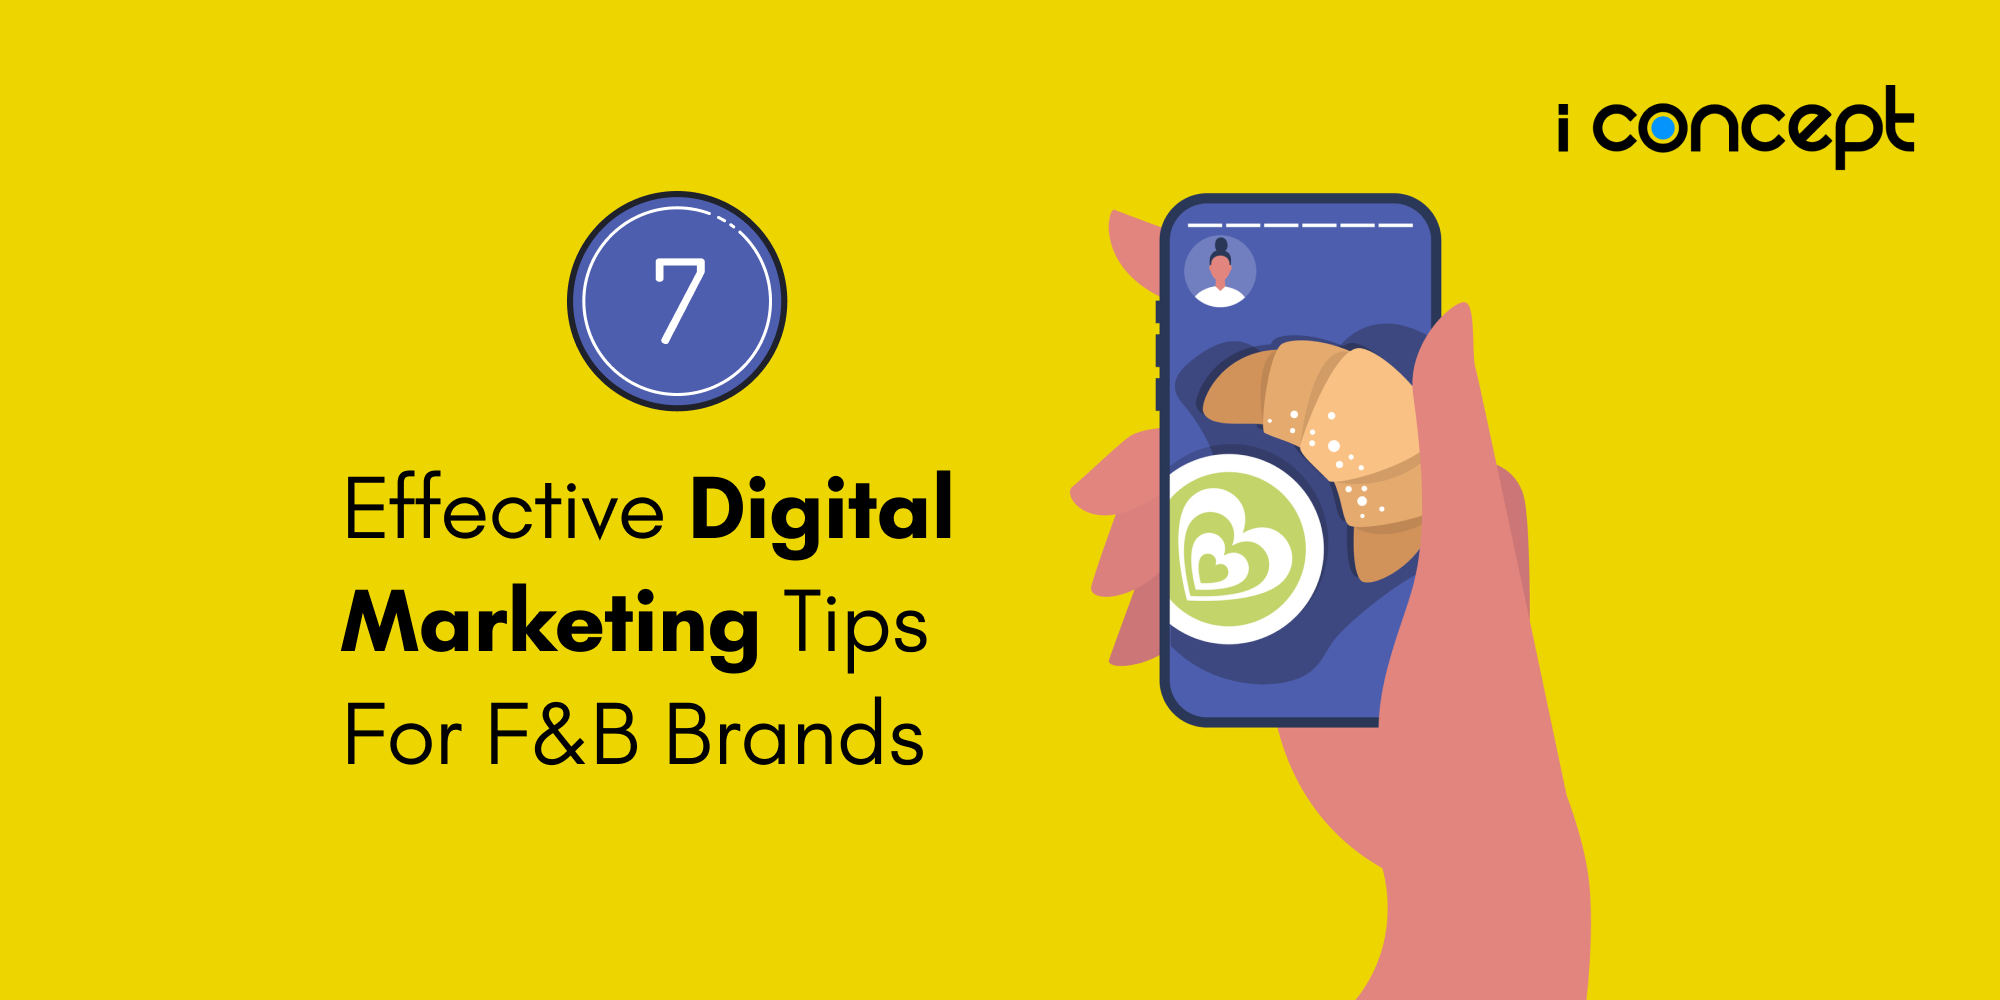 Digital Marketing in Singapore: 7 Effective Tips for F&B Brands